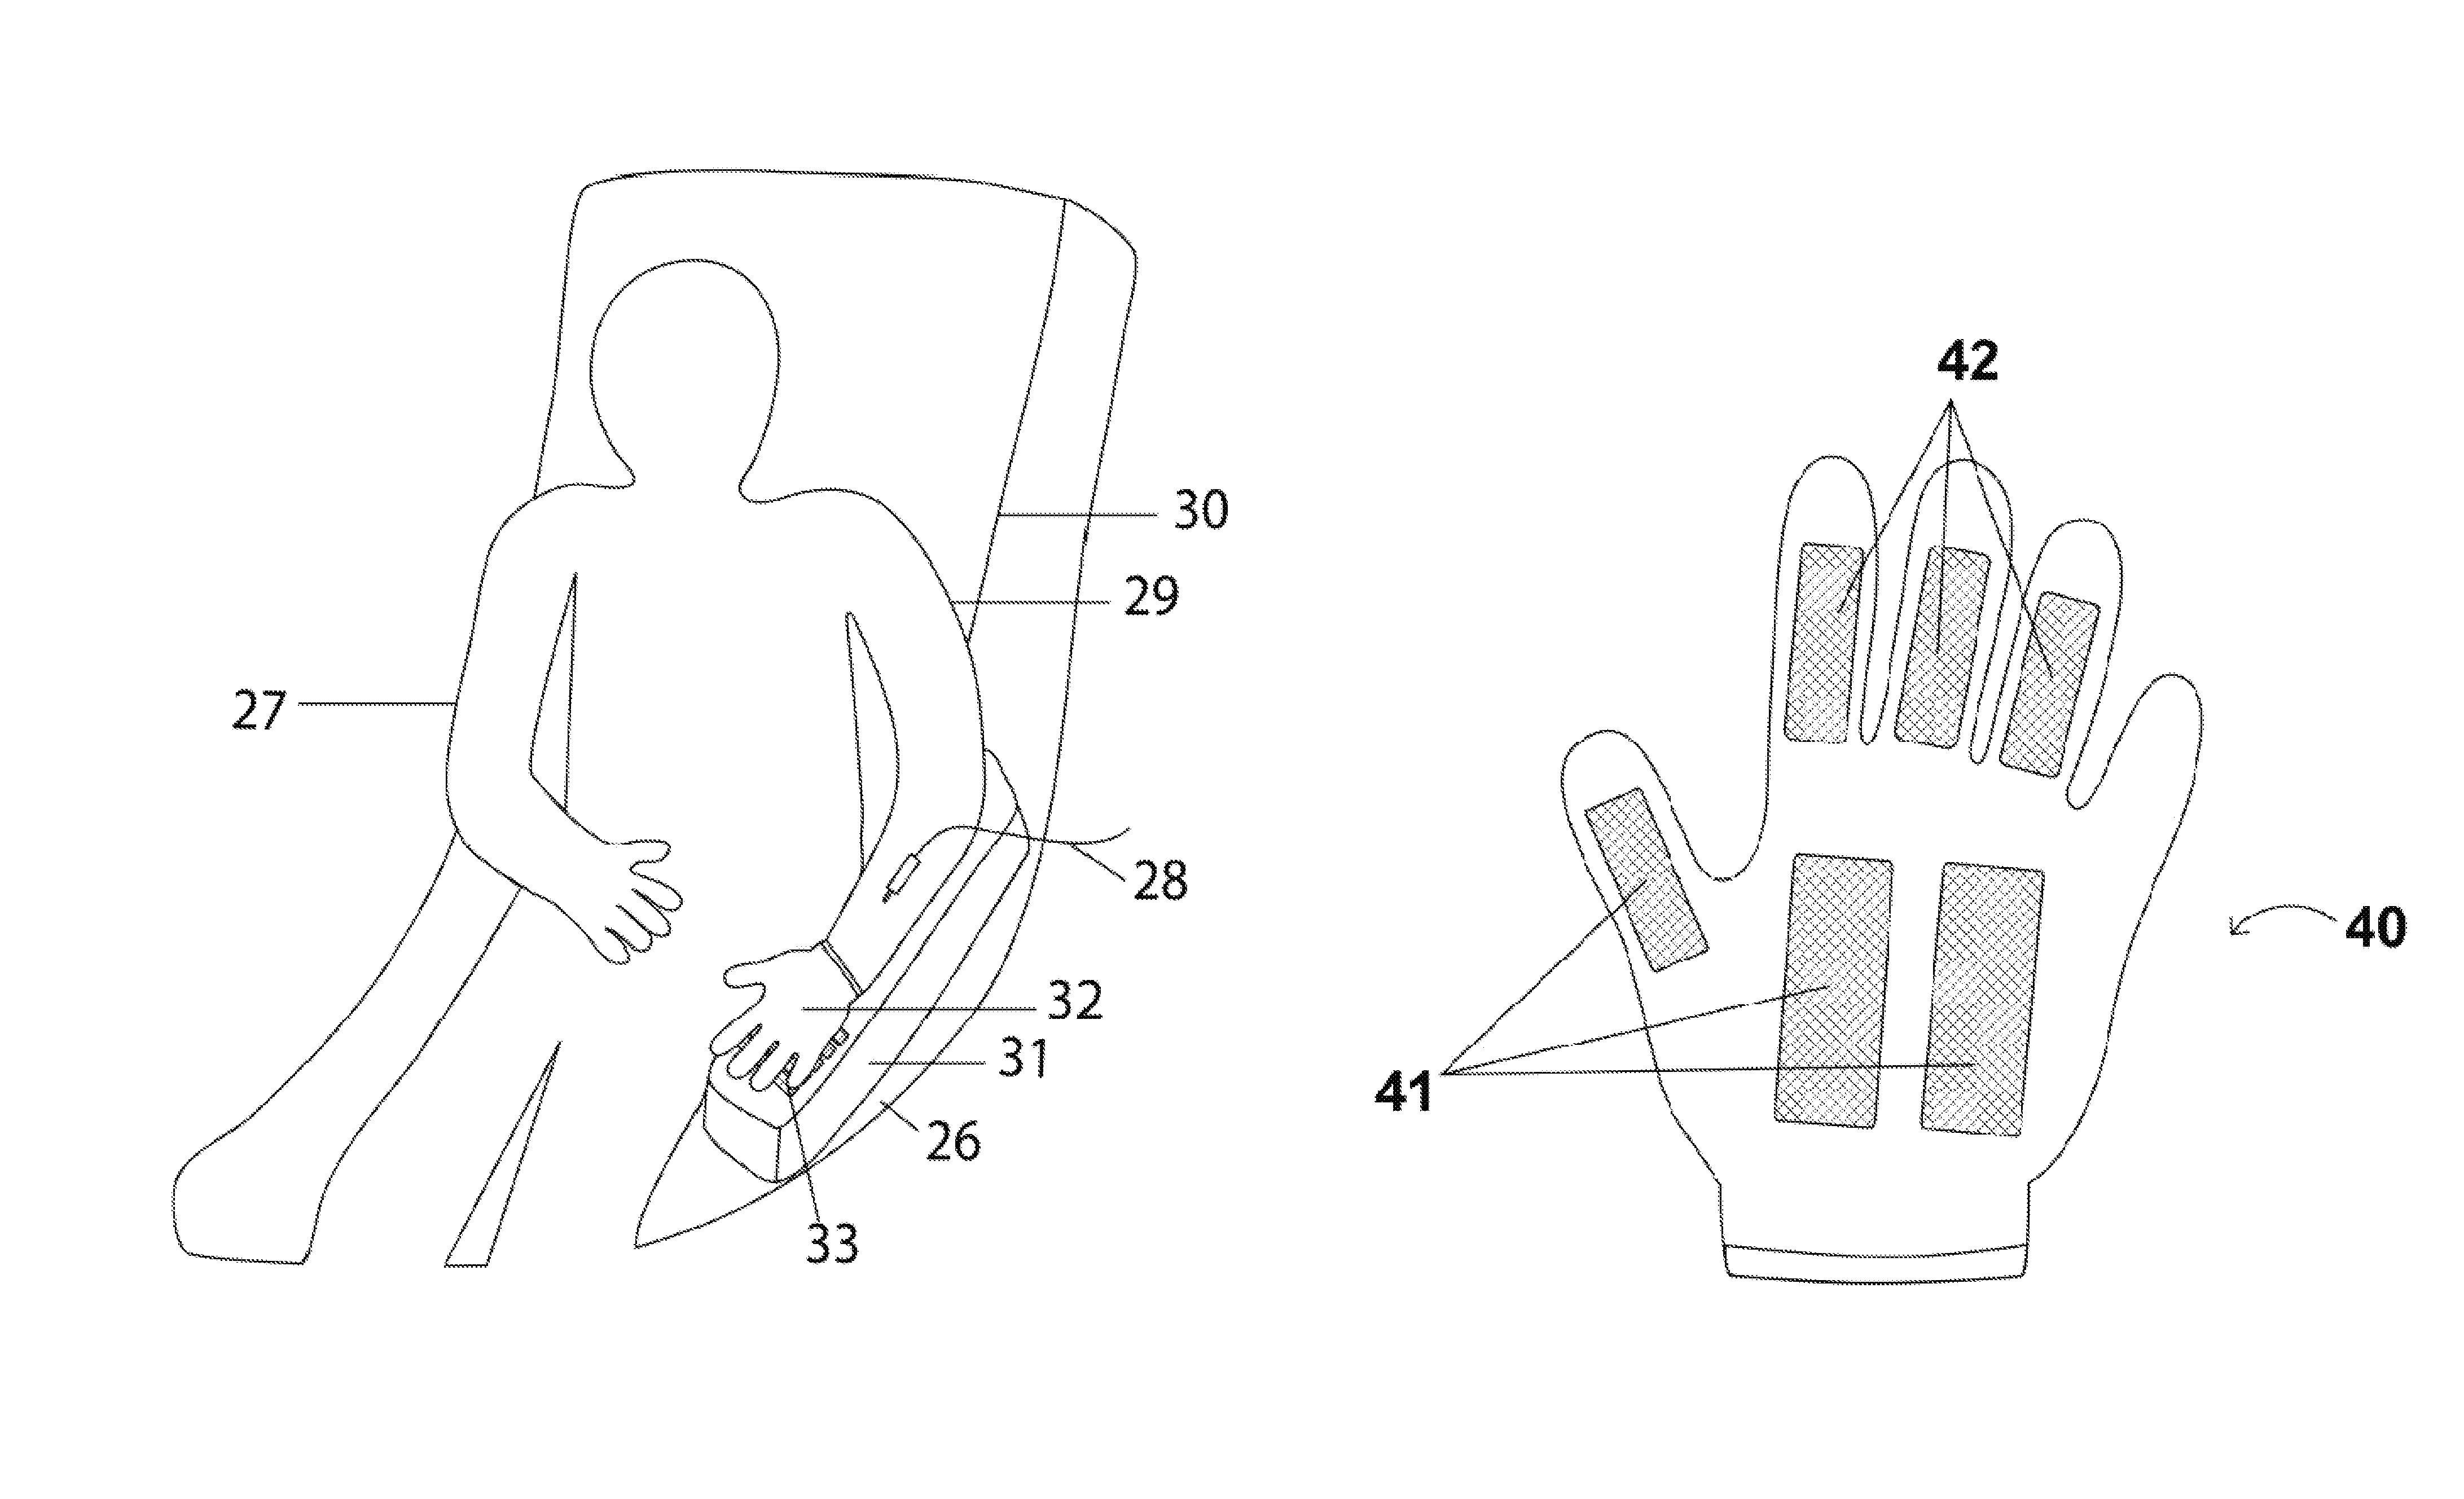 Support and stabilization device for dialysis treatment